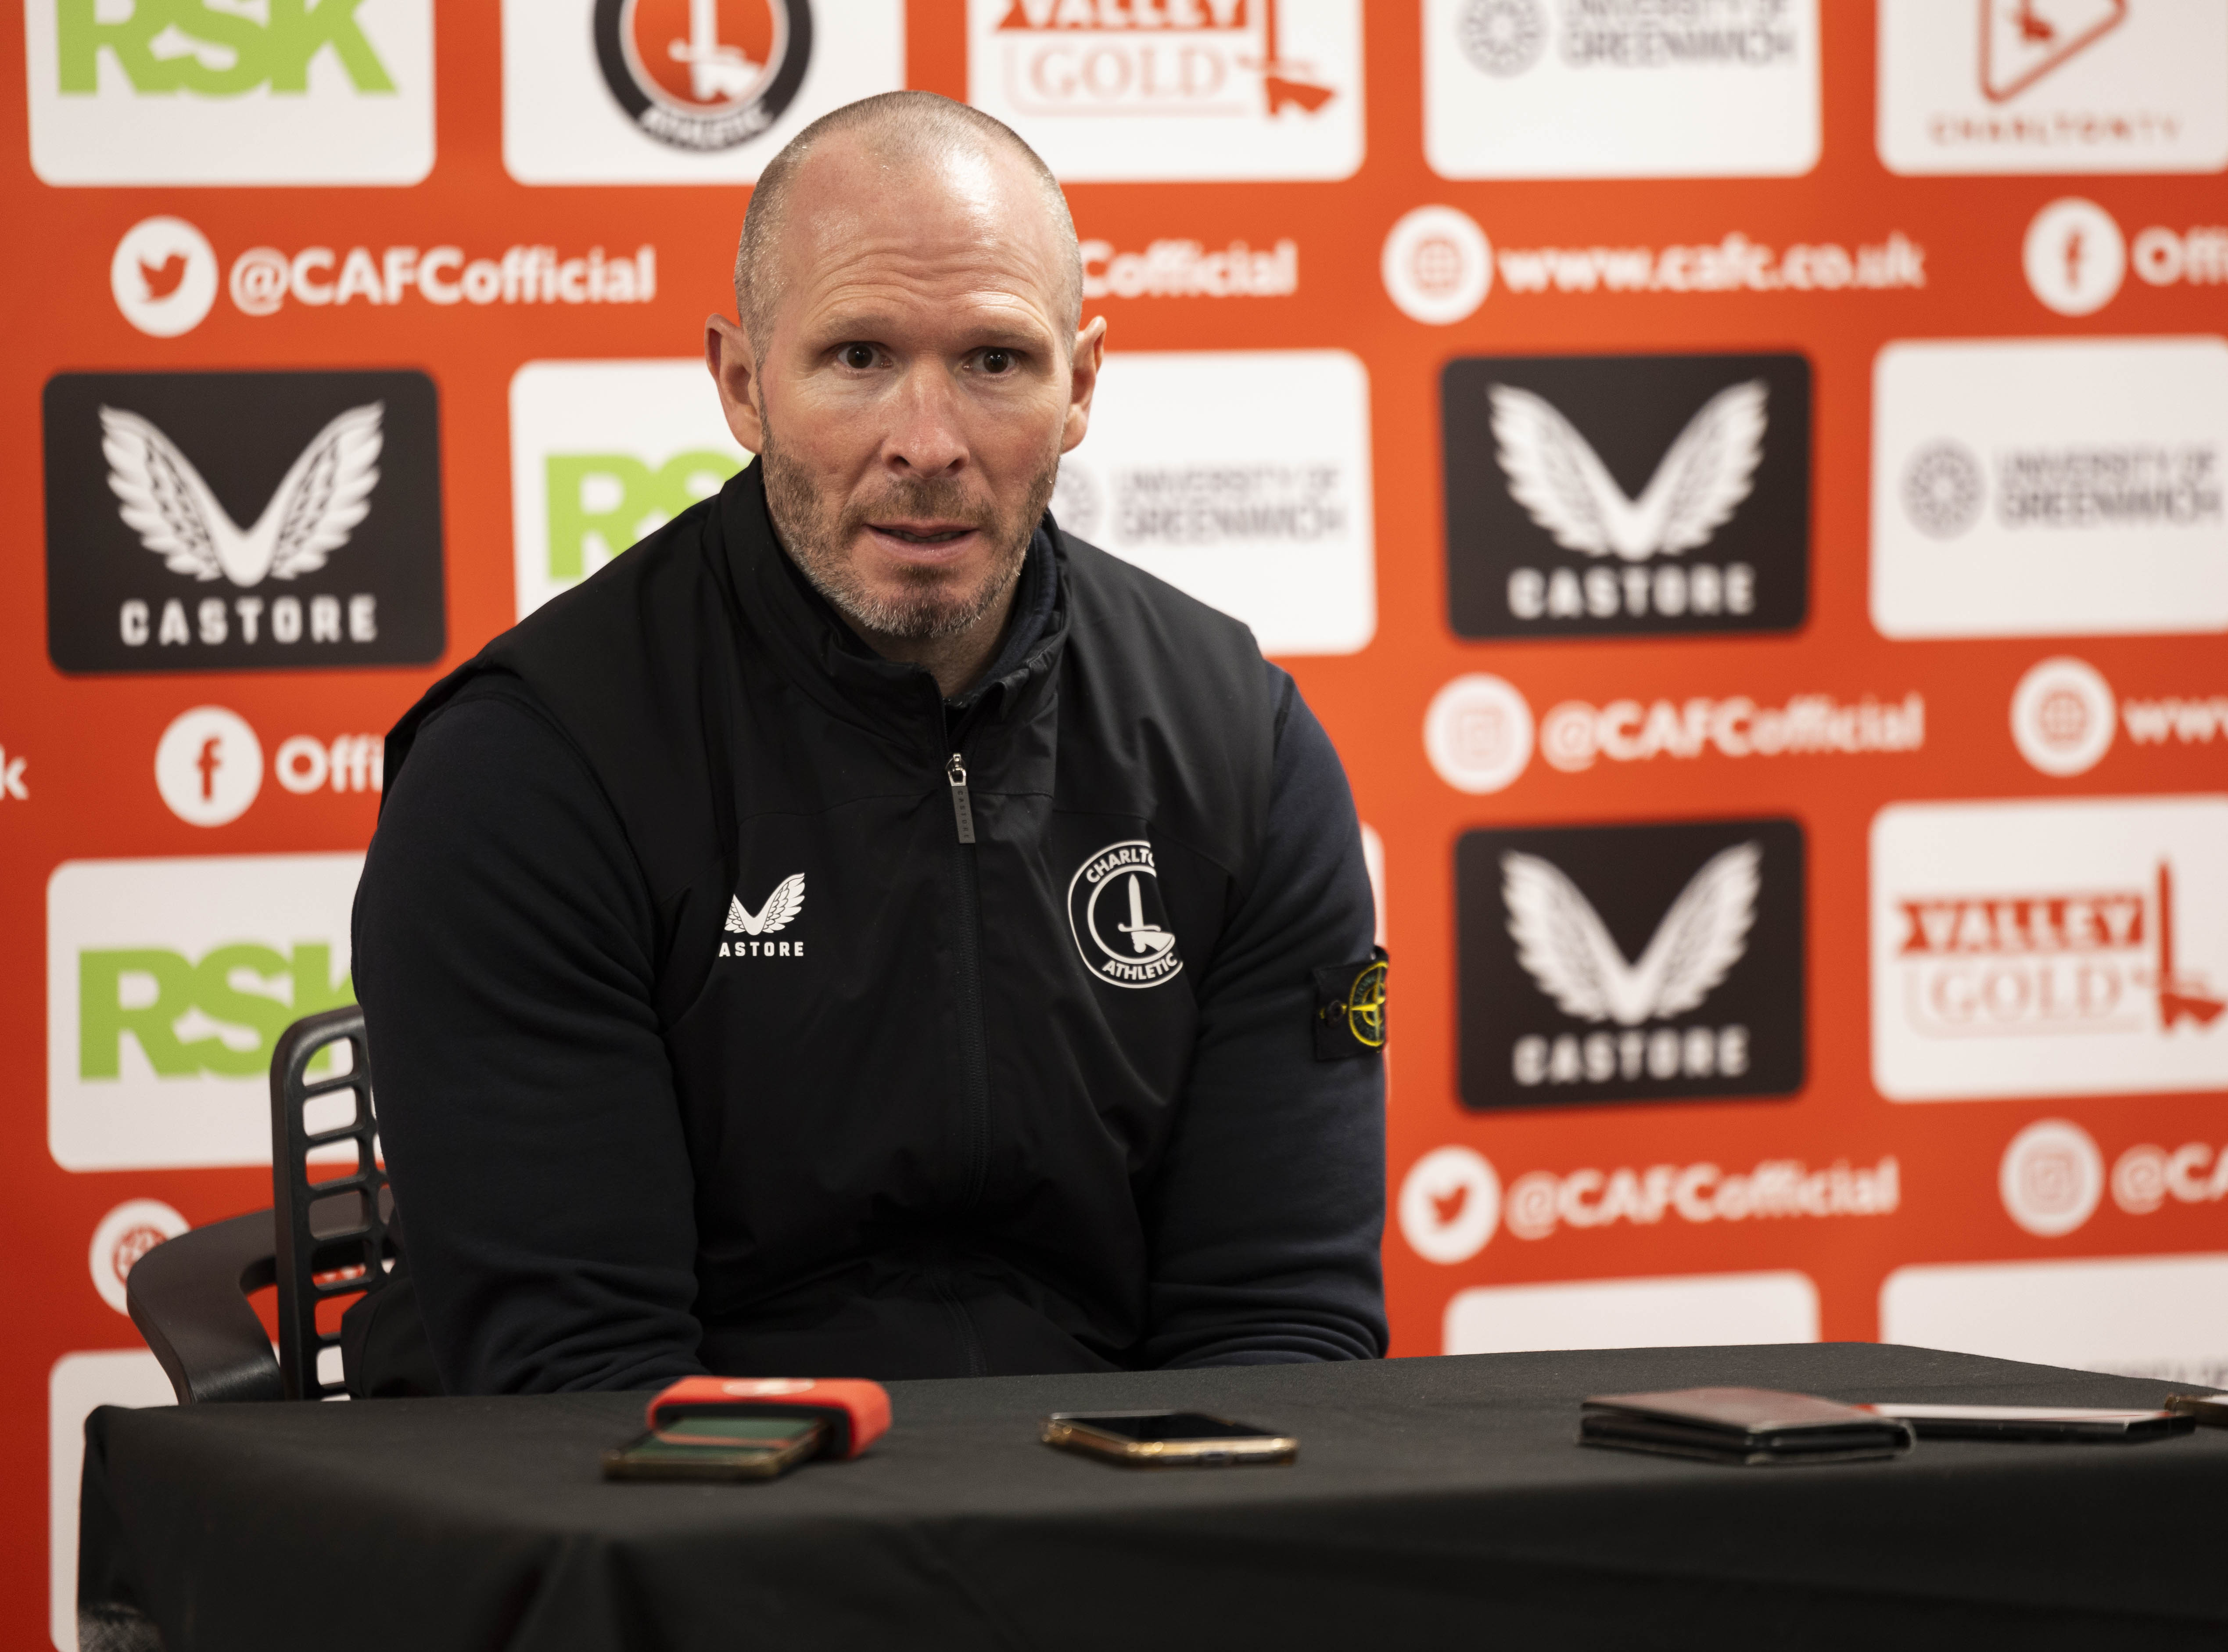 Michael Appleton in his press conference